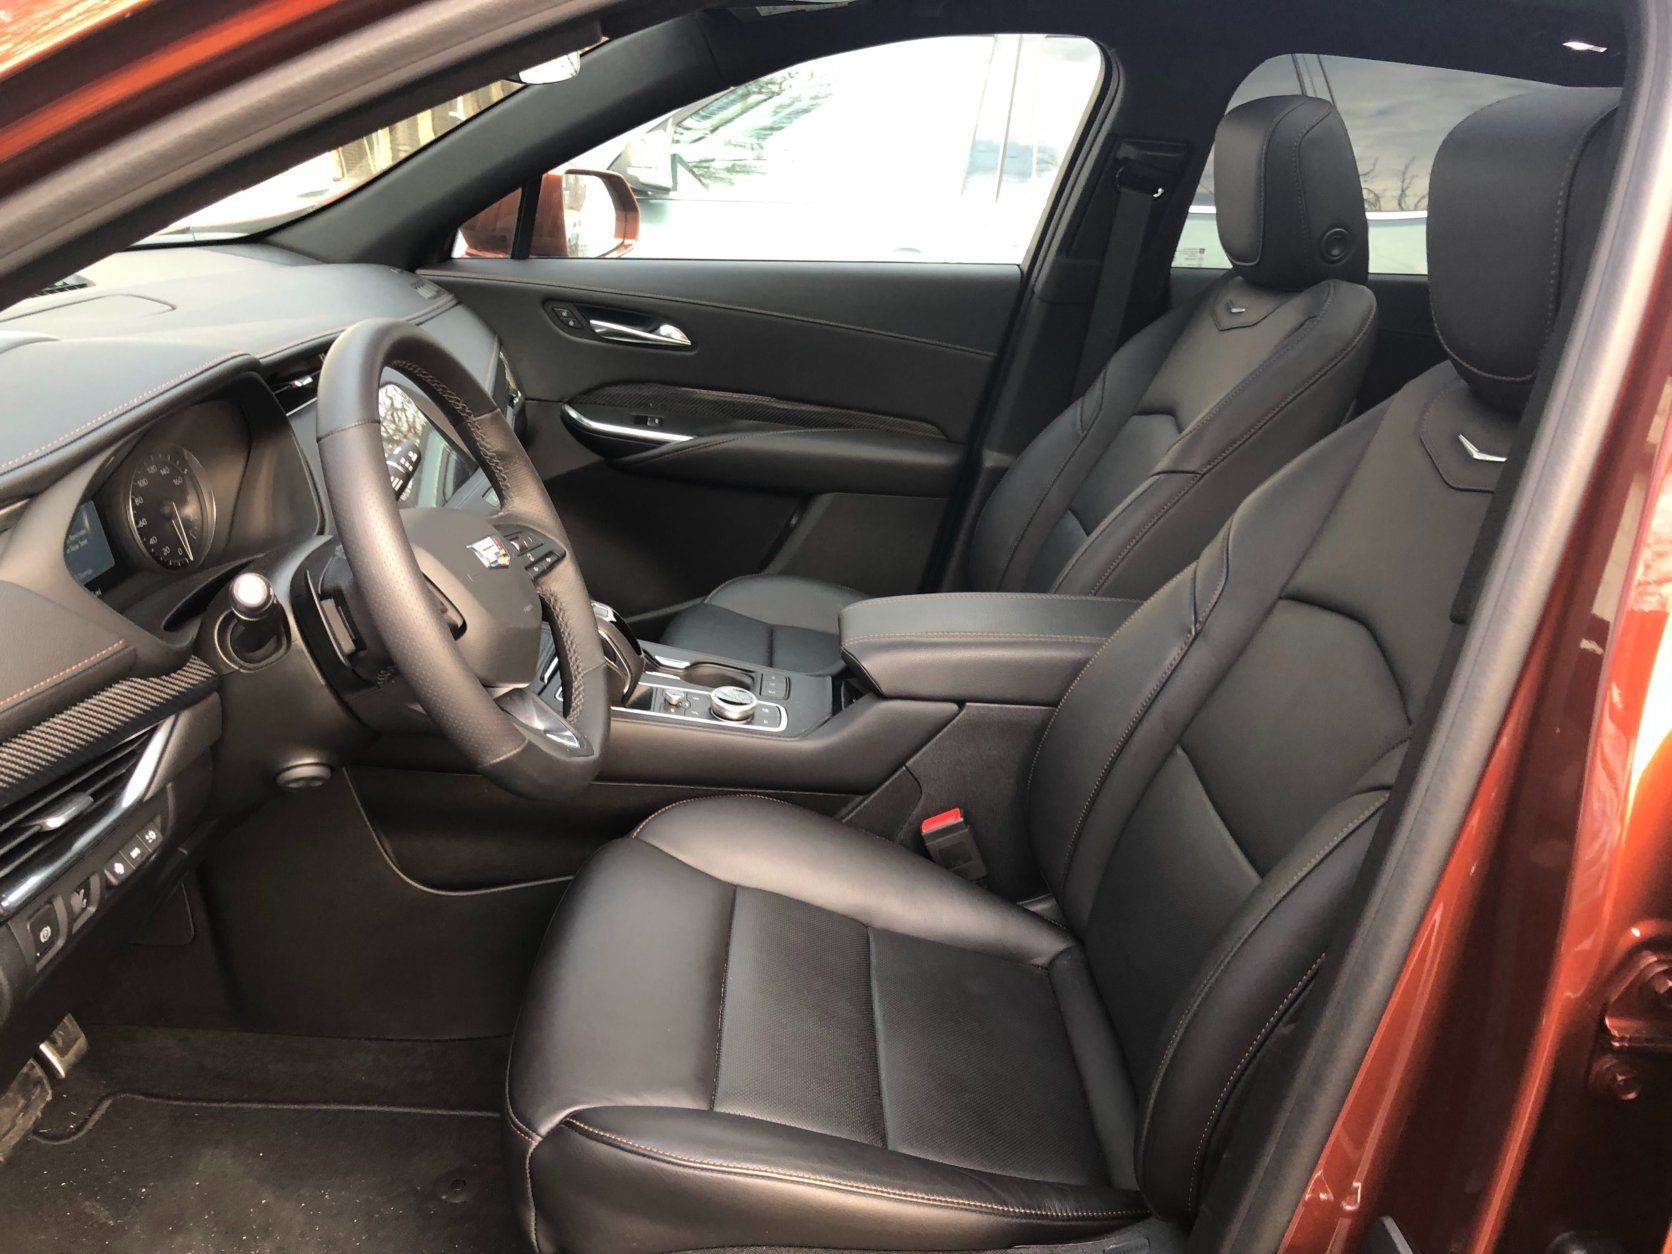 <p>While the new Cadillac is small on the outside, it’s surprisingly spacious on the inside. There is adequate space for those riding up front and two adults can fit in the back without much hassle.</p>
<p>Materials in the interior are a mixed bag of really high quality with some cheaper plastics. Nice dash and top half of door panels lead to lower hard plastics that are mostly out of sight.</p>
